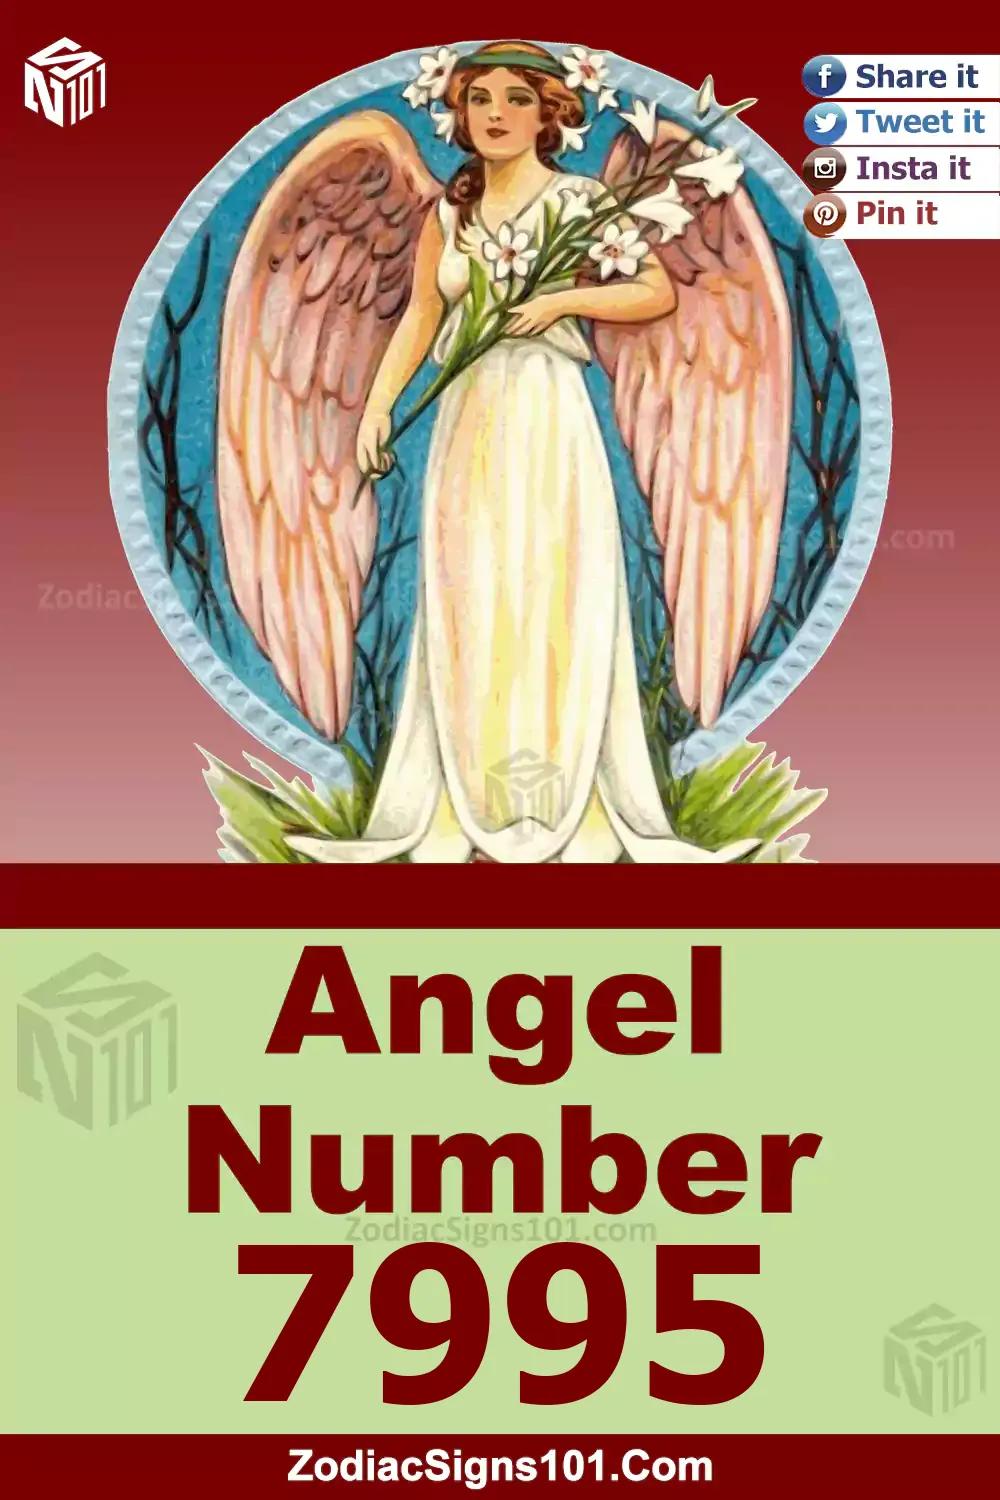 7995 Angel Number Meaning